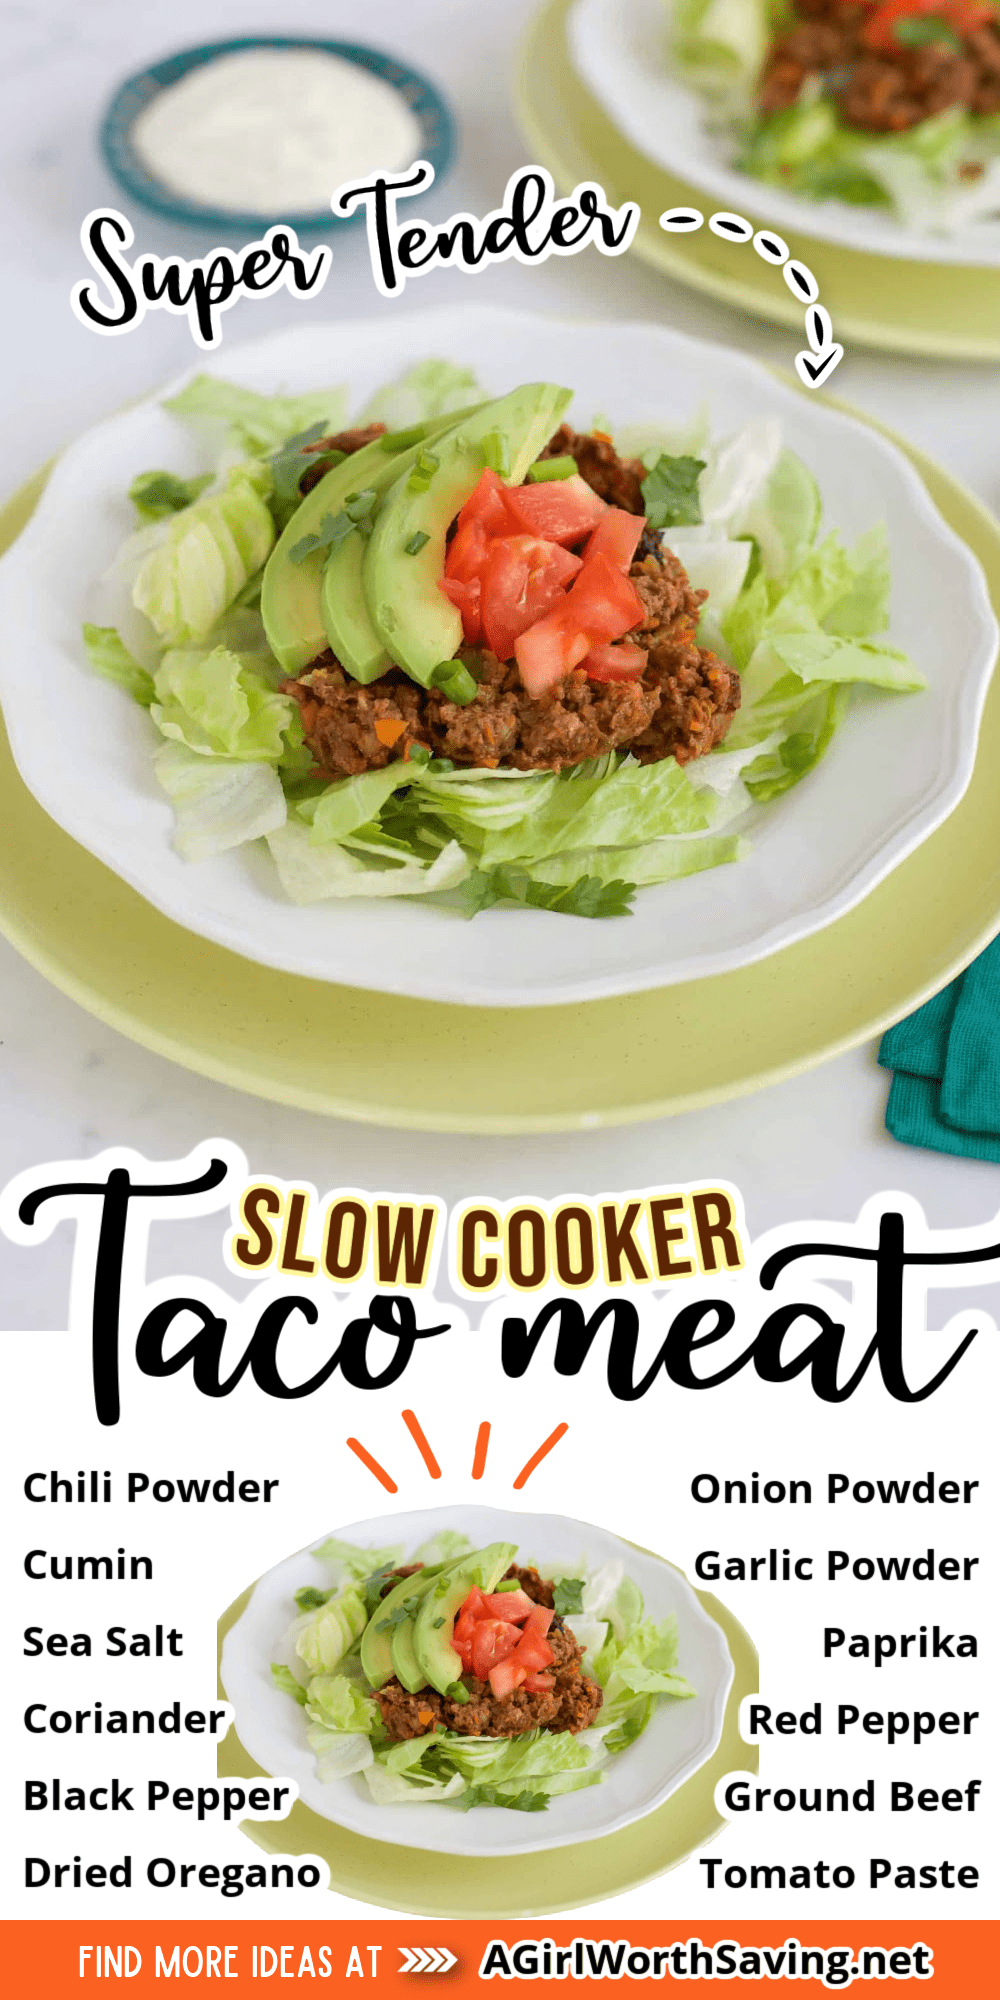 Make taco night a breeze with this tender and flavorful Slow Cooker Taco Meat recipe. Dump ground beef and simple spices in your slow cooker and dinner is done! This will become your families favorite taco!